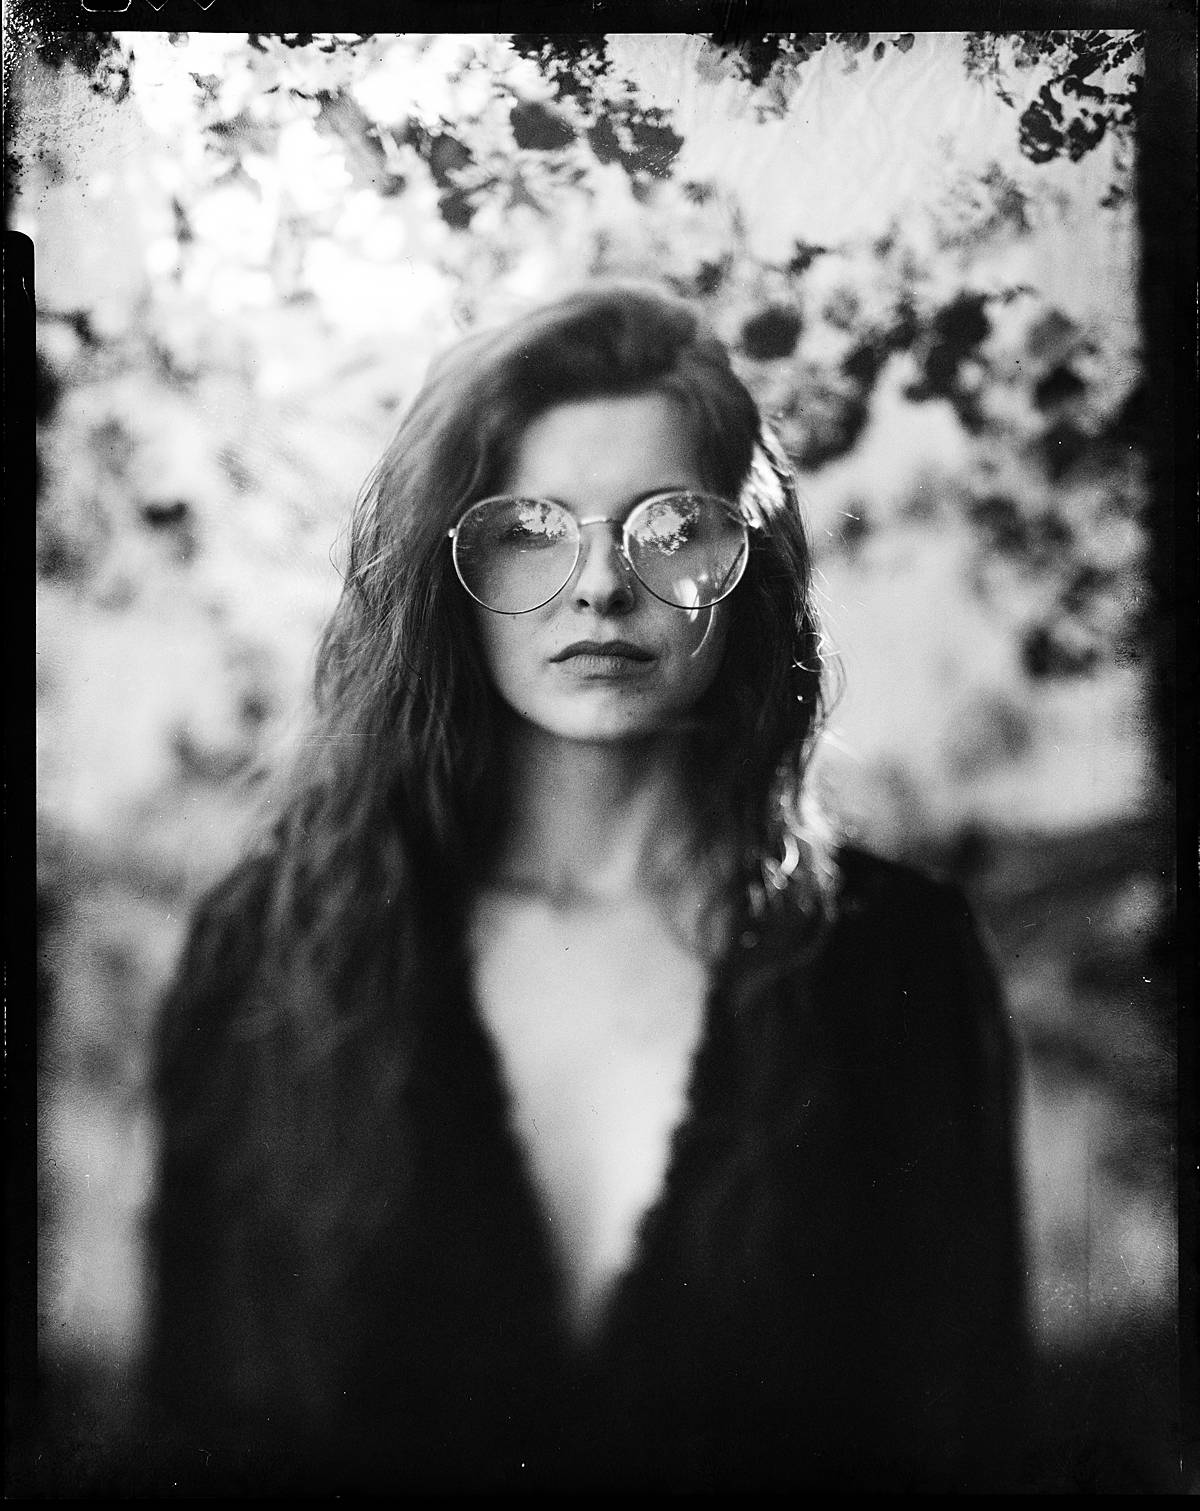 4x5 large format film portrait on black and white expired kodak t-max 400 film of a girl in black dress and sunglasses